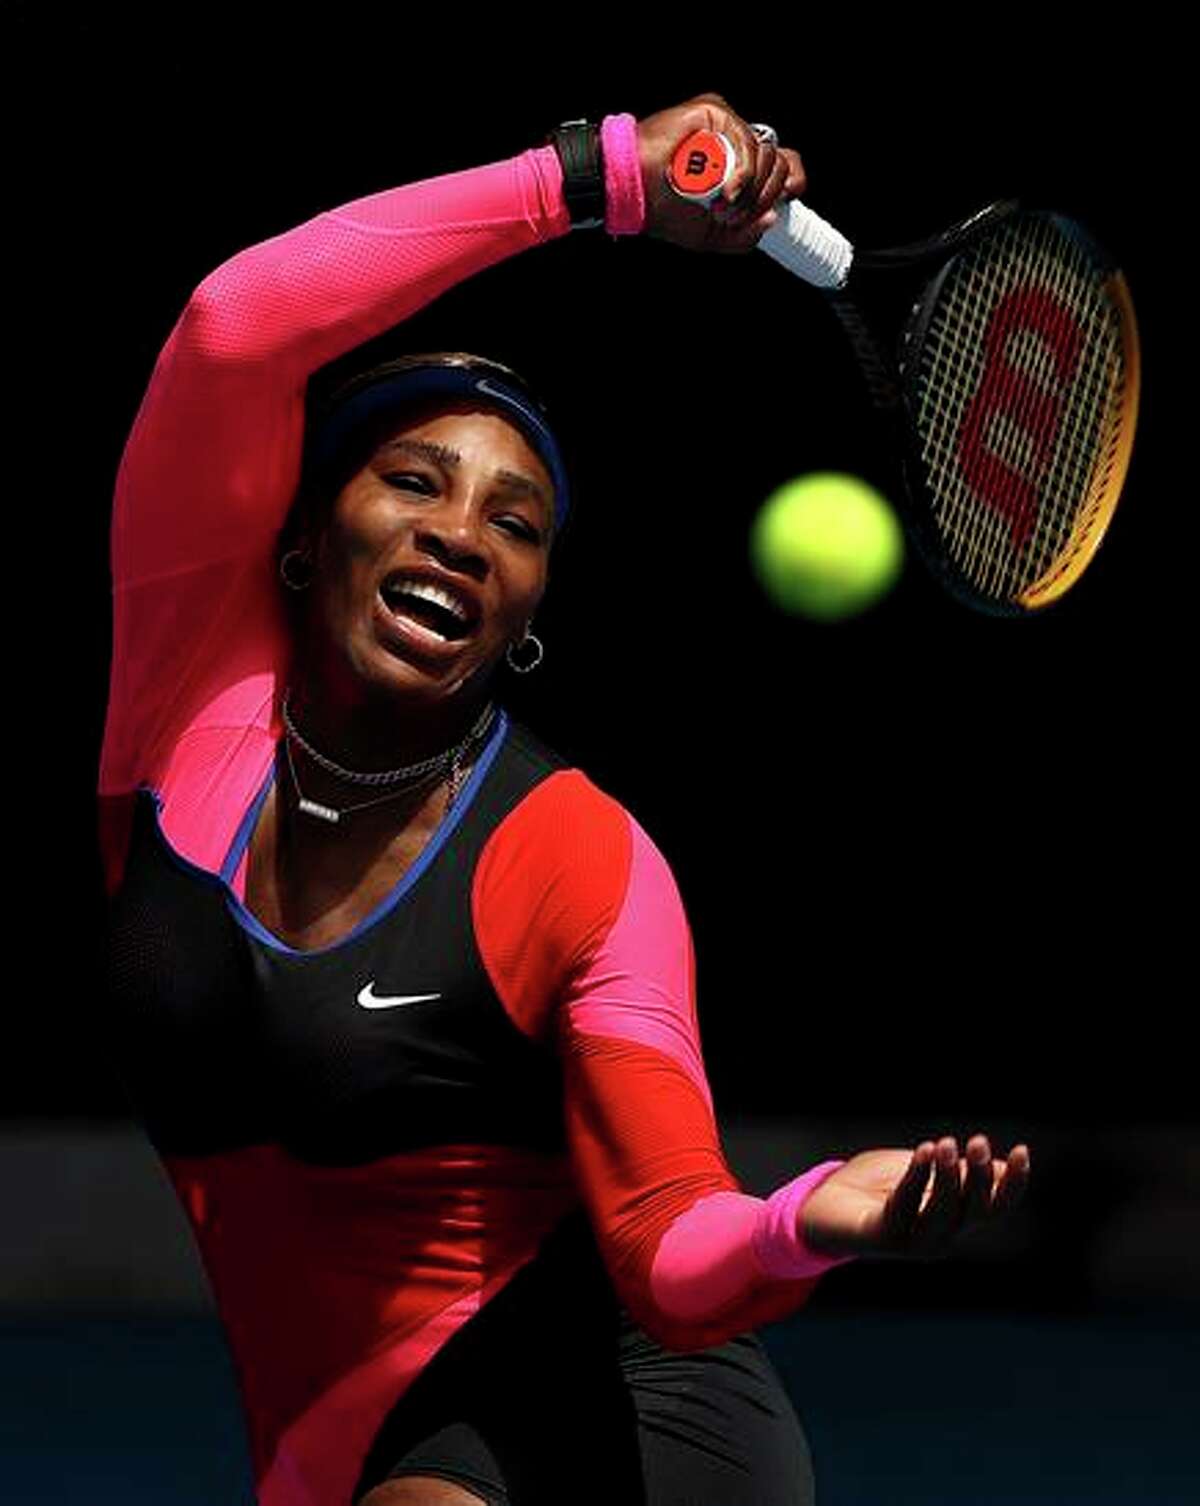 Williams plays a forehand during the 2021 Australian Open, site of her last Grand Slam title, in 2017.